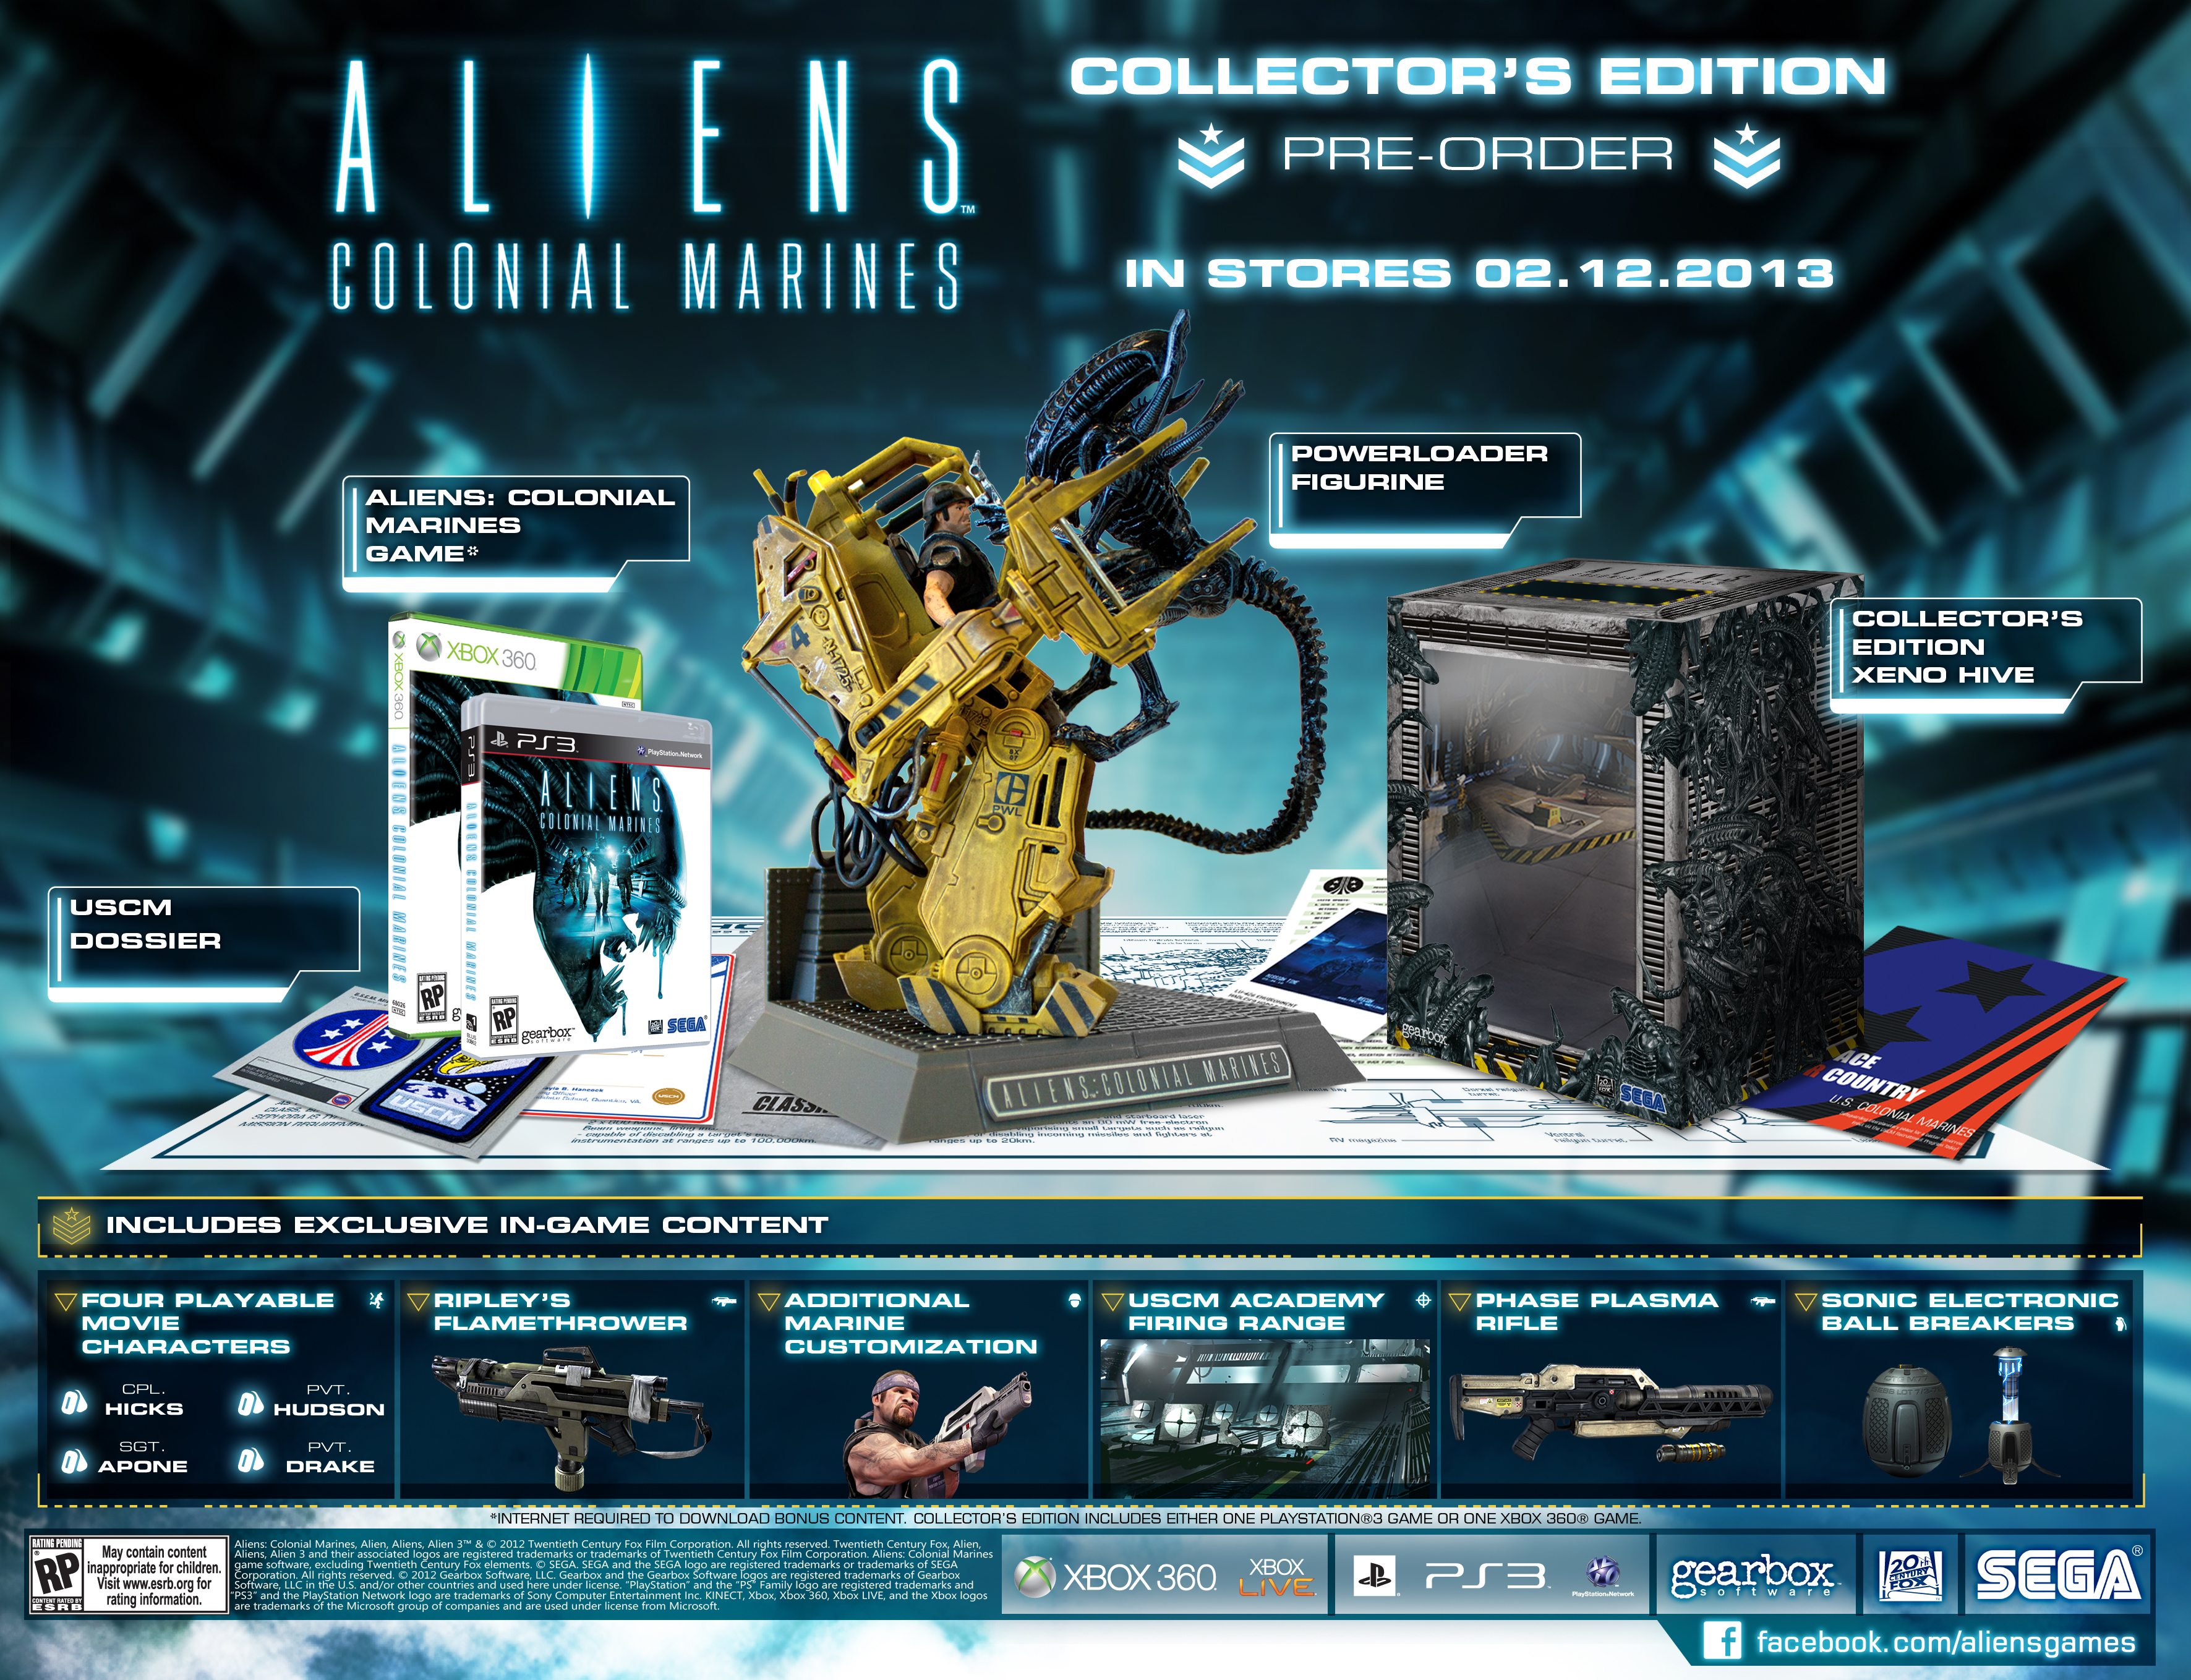 Ps3 patches. Aliens Colonial Marines Collector's Edition. Aliens Colonial Marines чужие. Aliens: Colonial Marines (ps3). Aliens Colonial Marines Xbox 360.